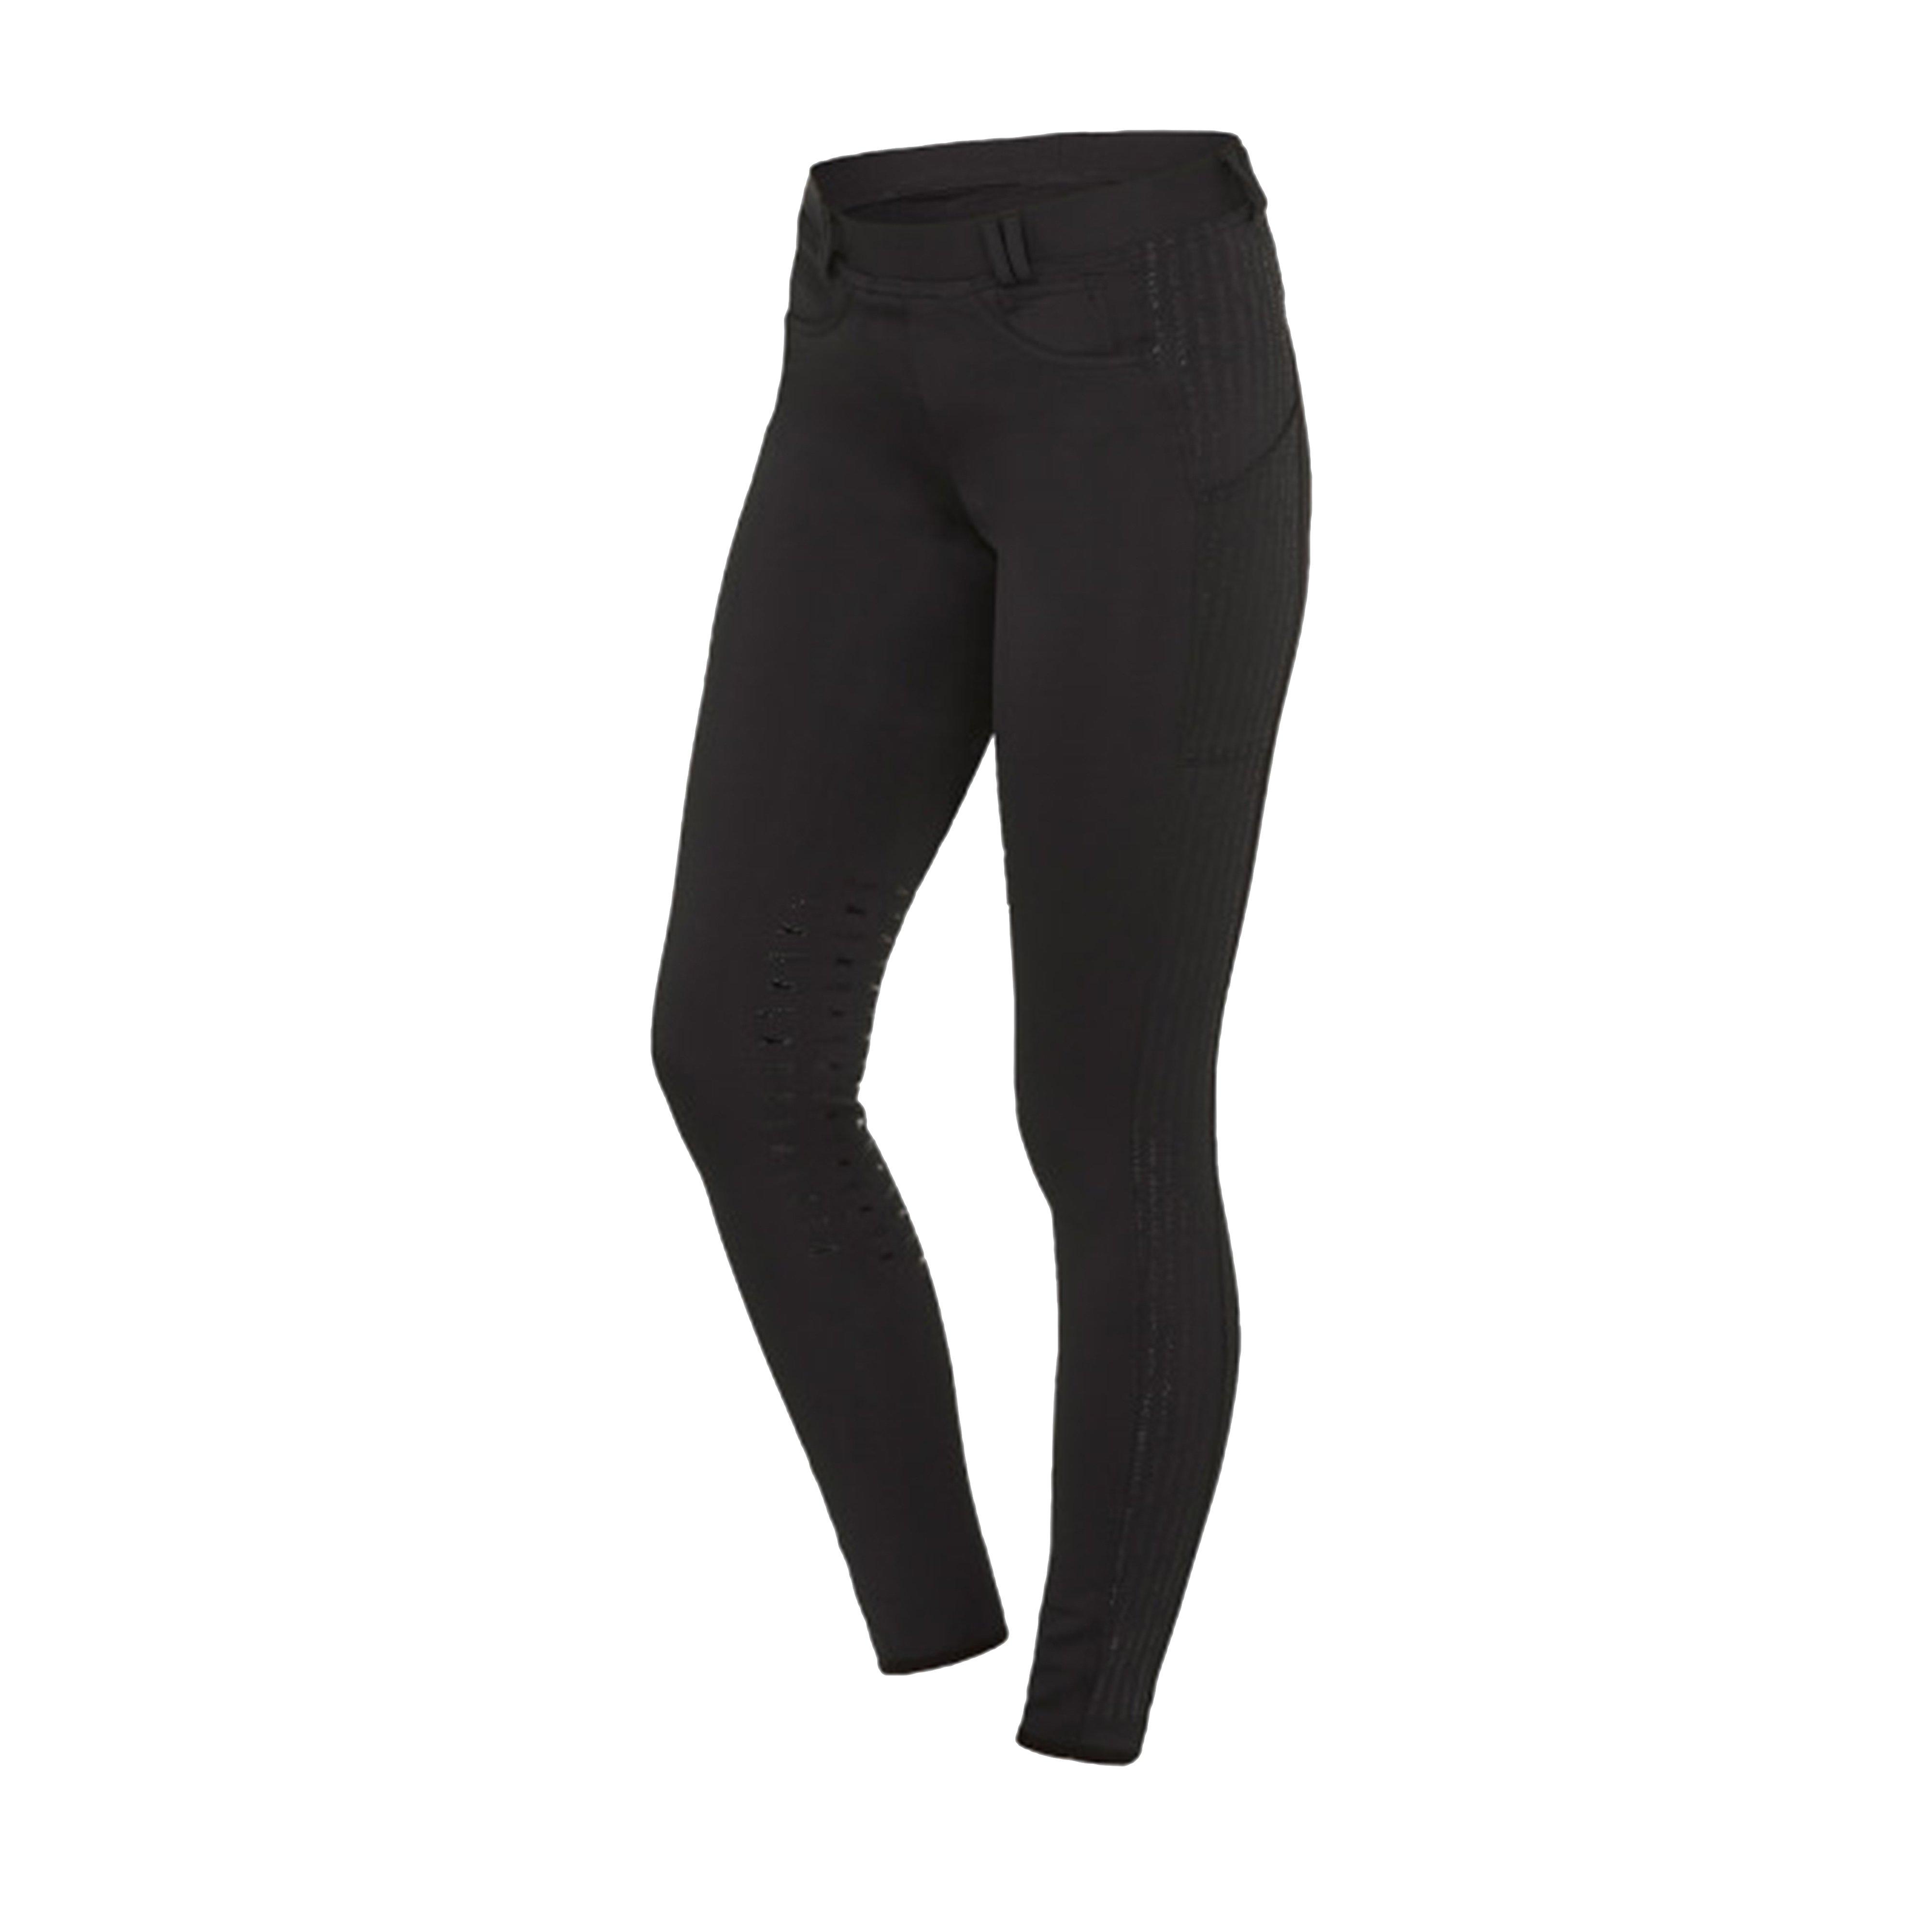 Womens Sporty Knee Grip Riding Tights Cool Black